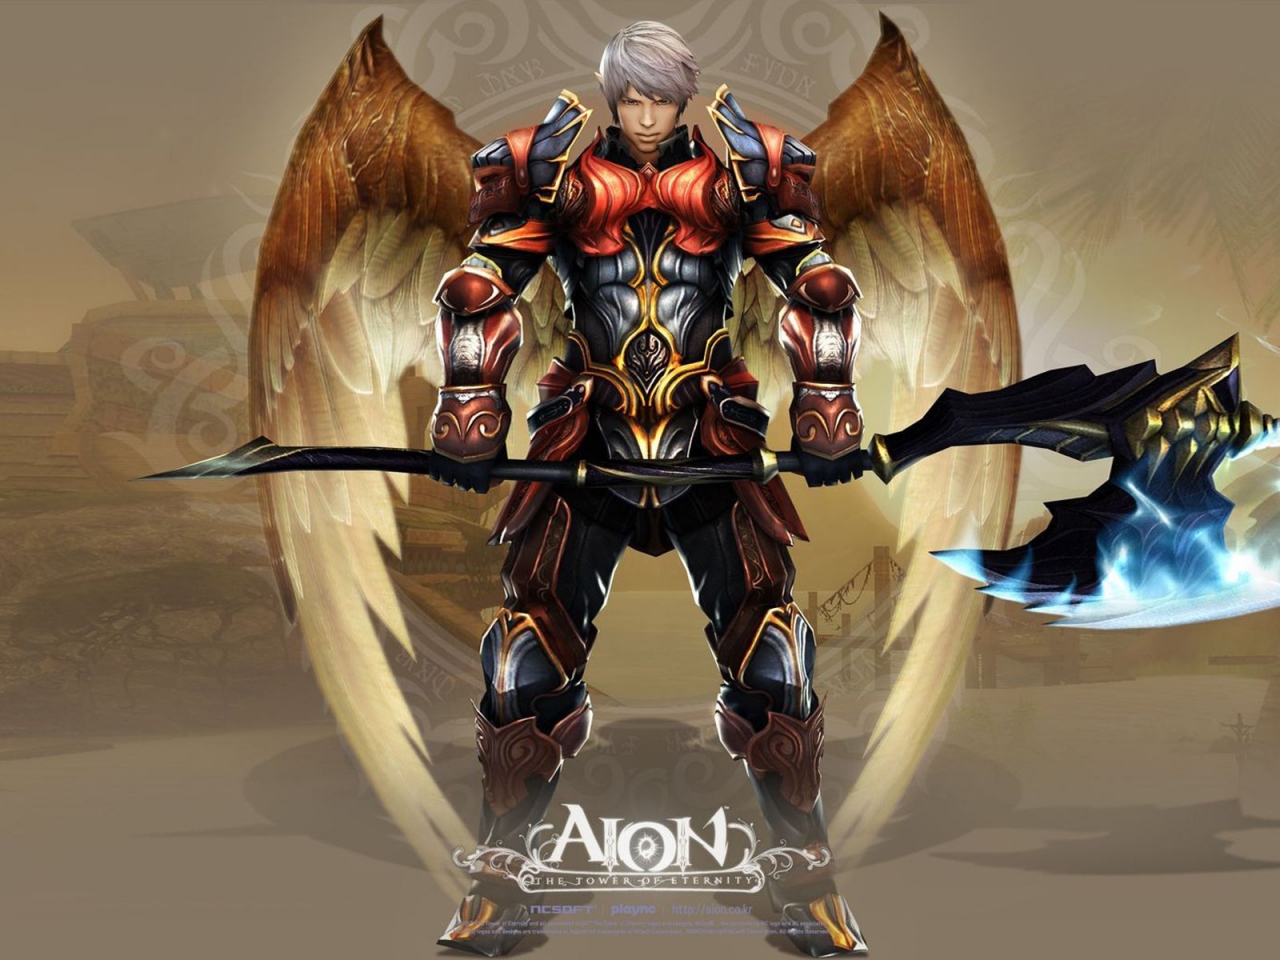 Aion for 1280 x 960 resolution